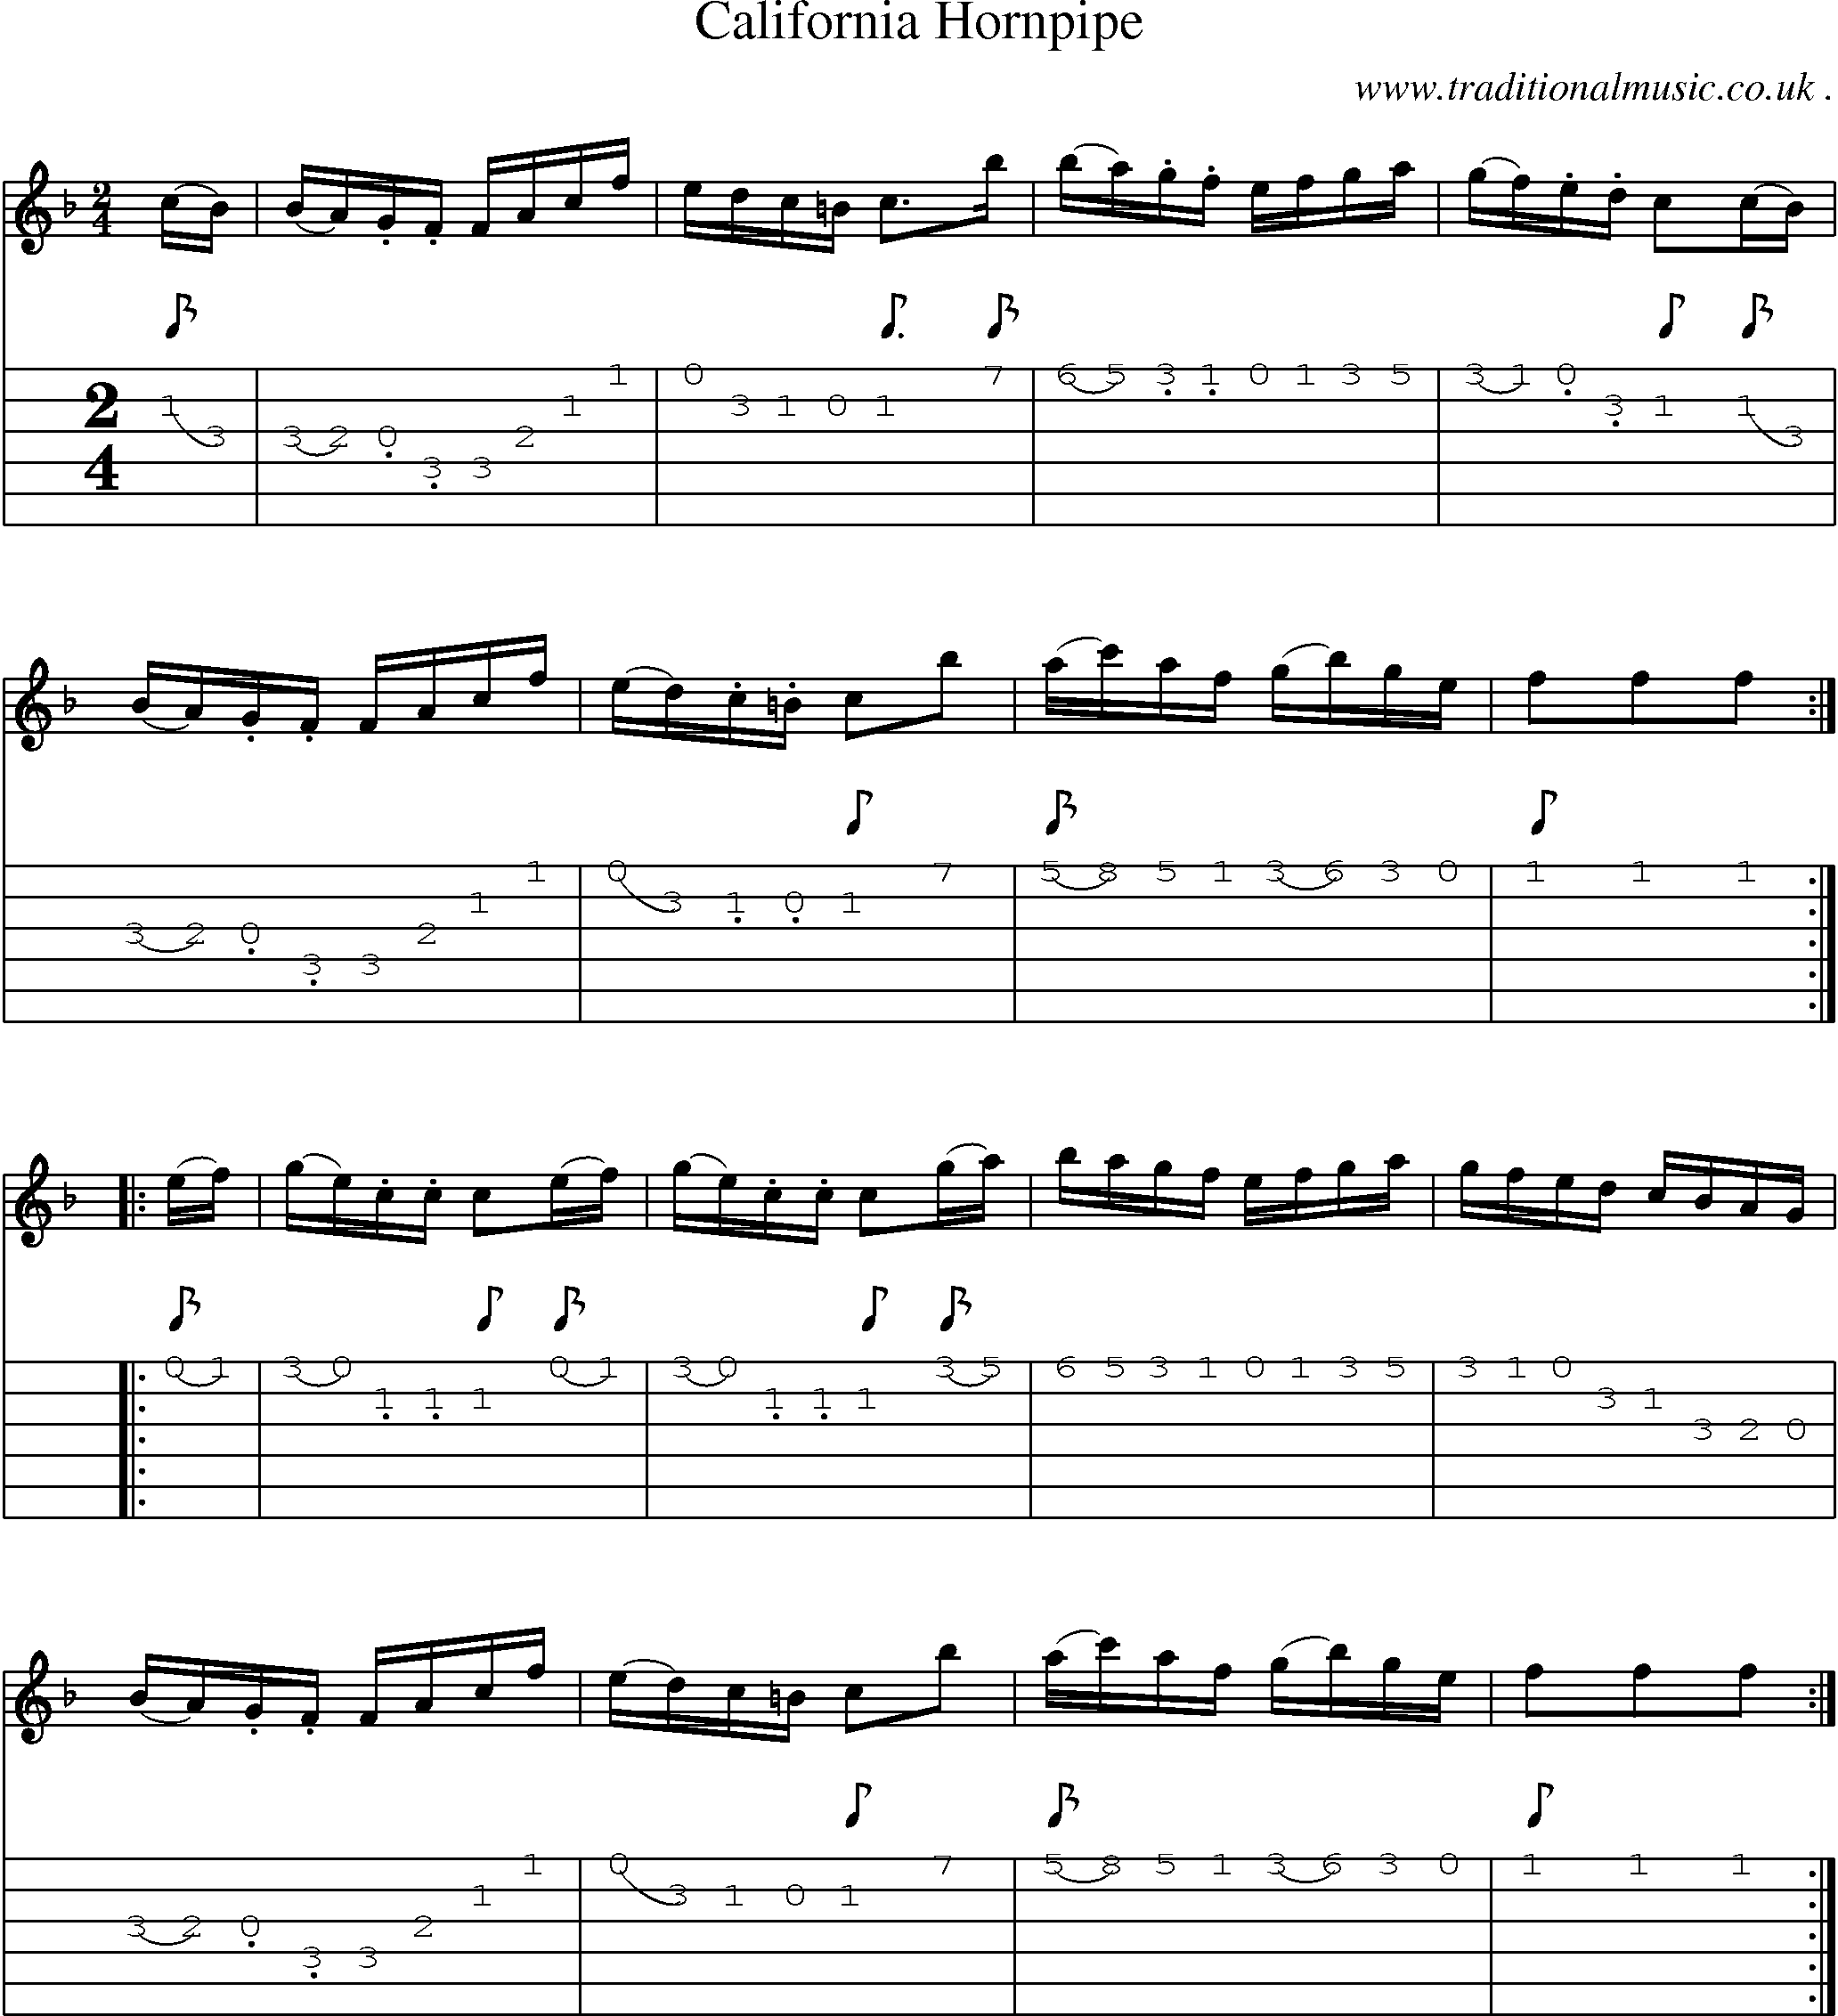 Music Score and Guitar Tabs for California Hornpipe